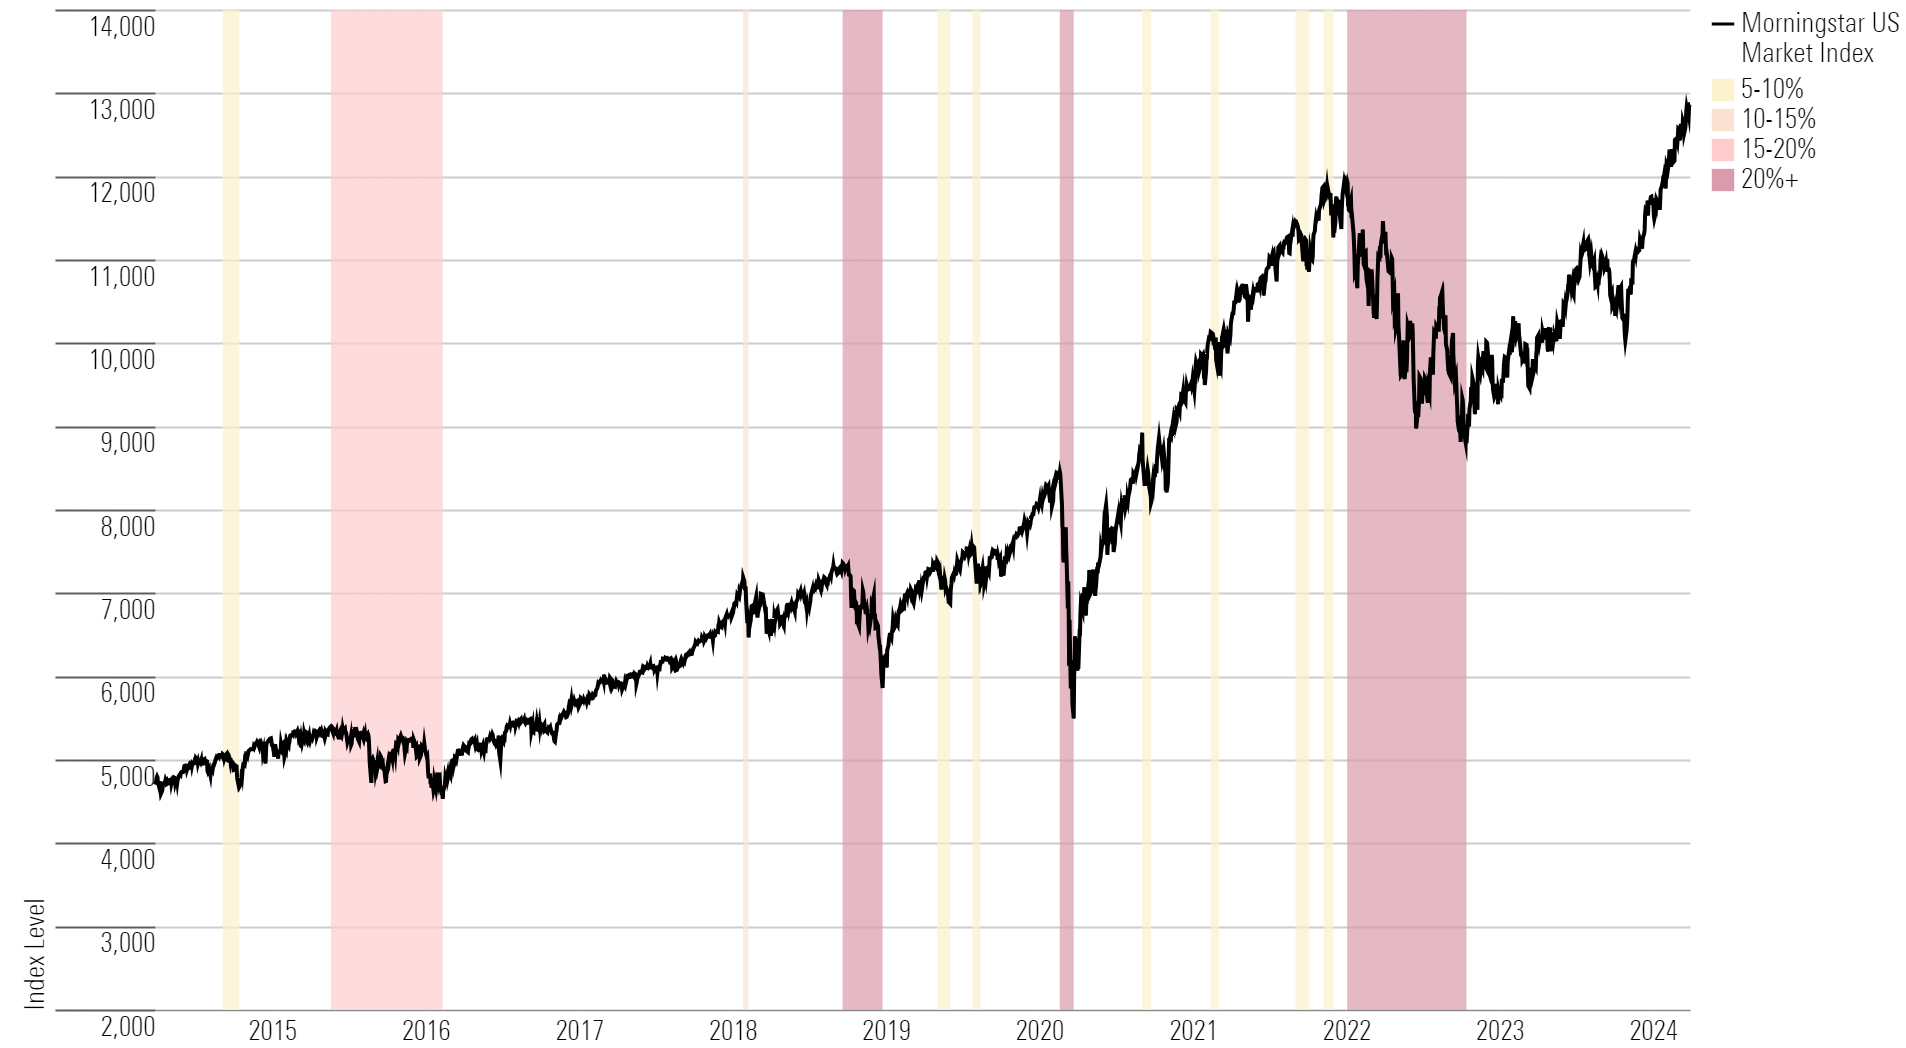 Line graph showing stock market pullbacks over the past 10 years